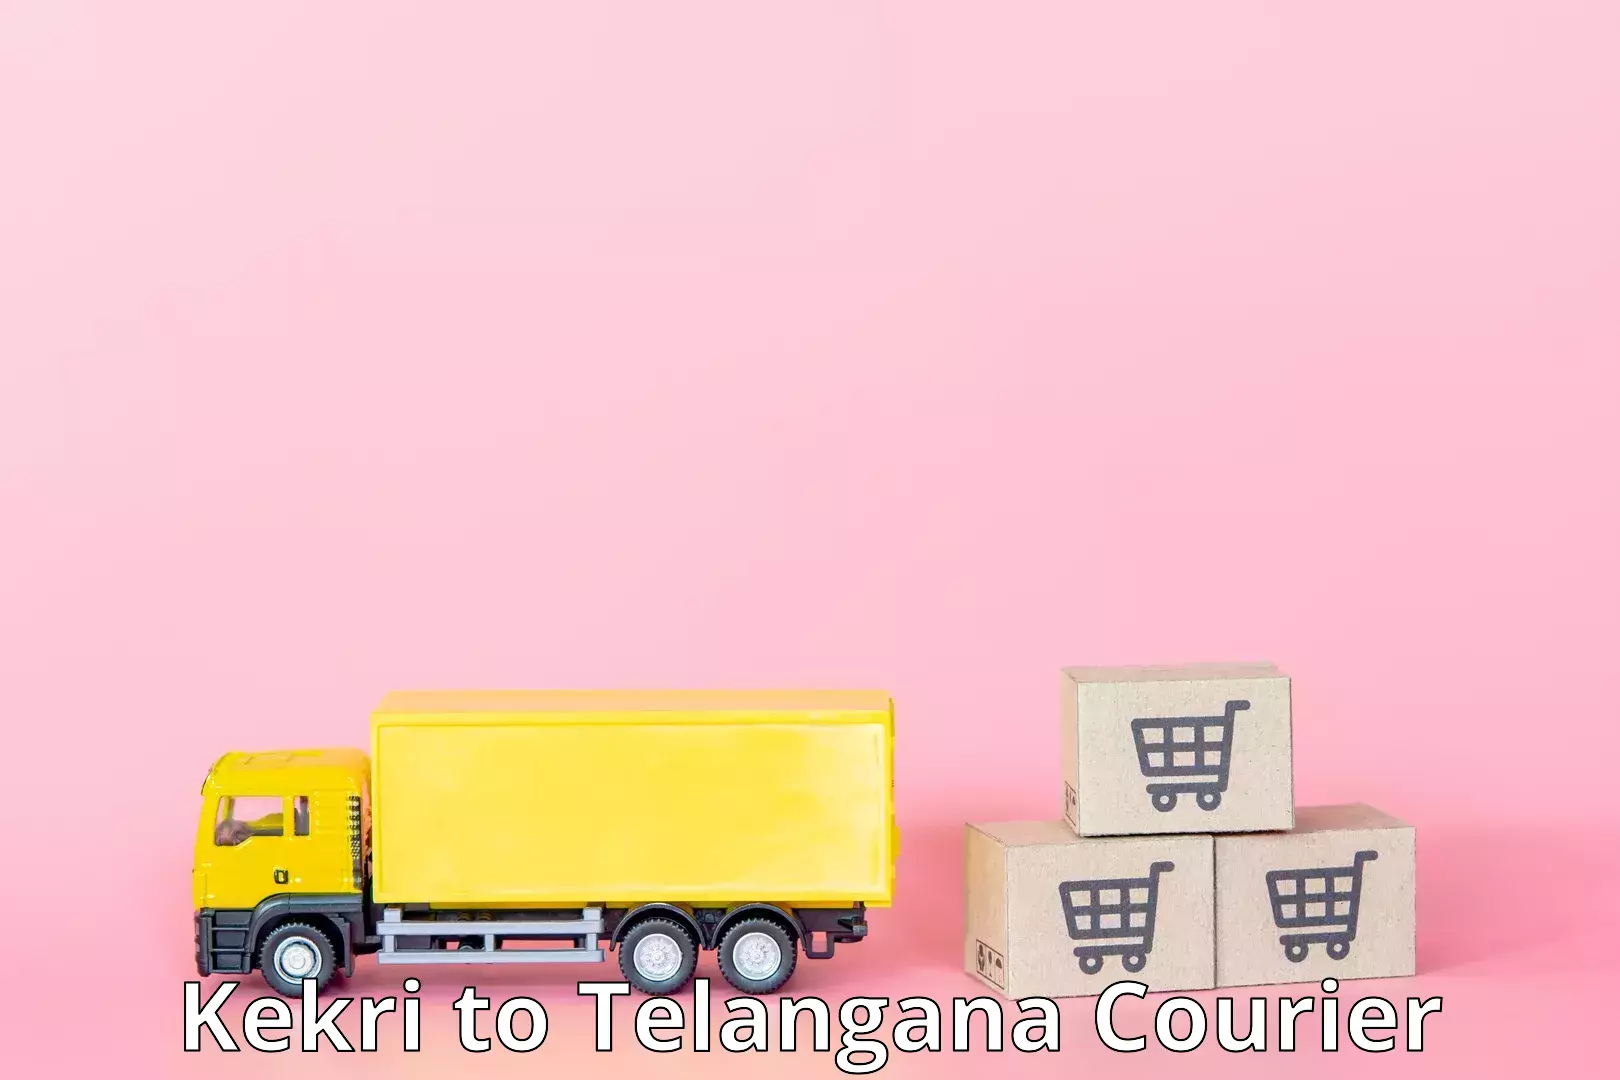 Enhanced delivery experience in Kekri to Telangana